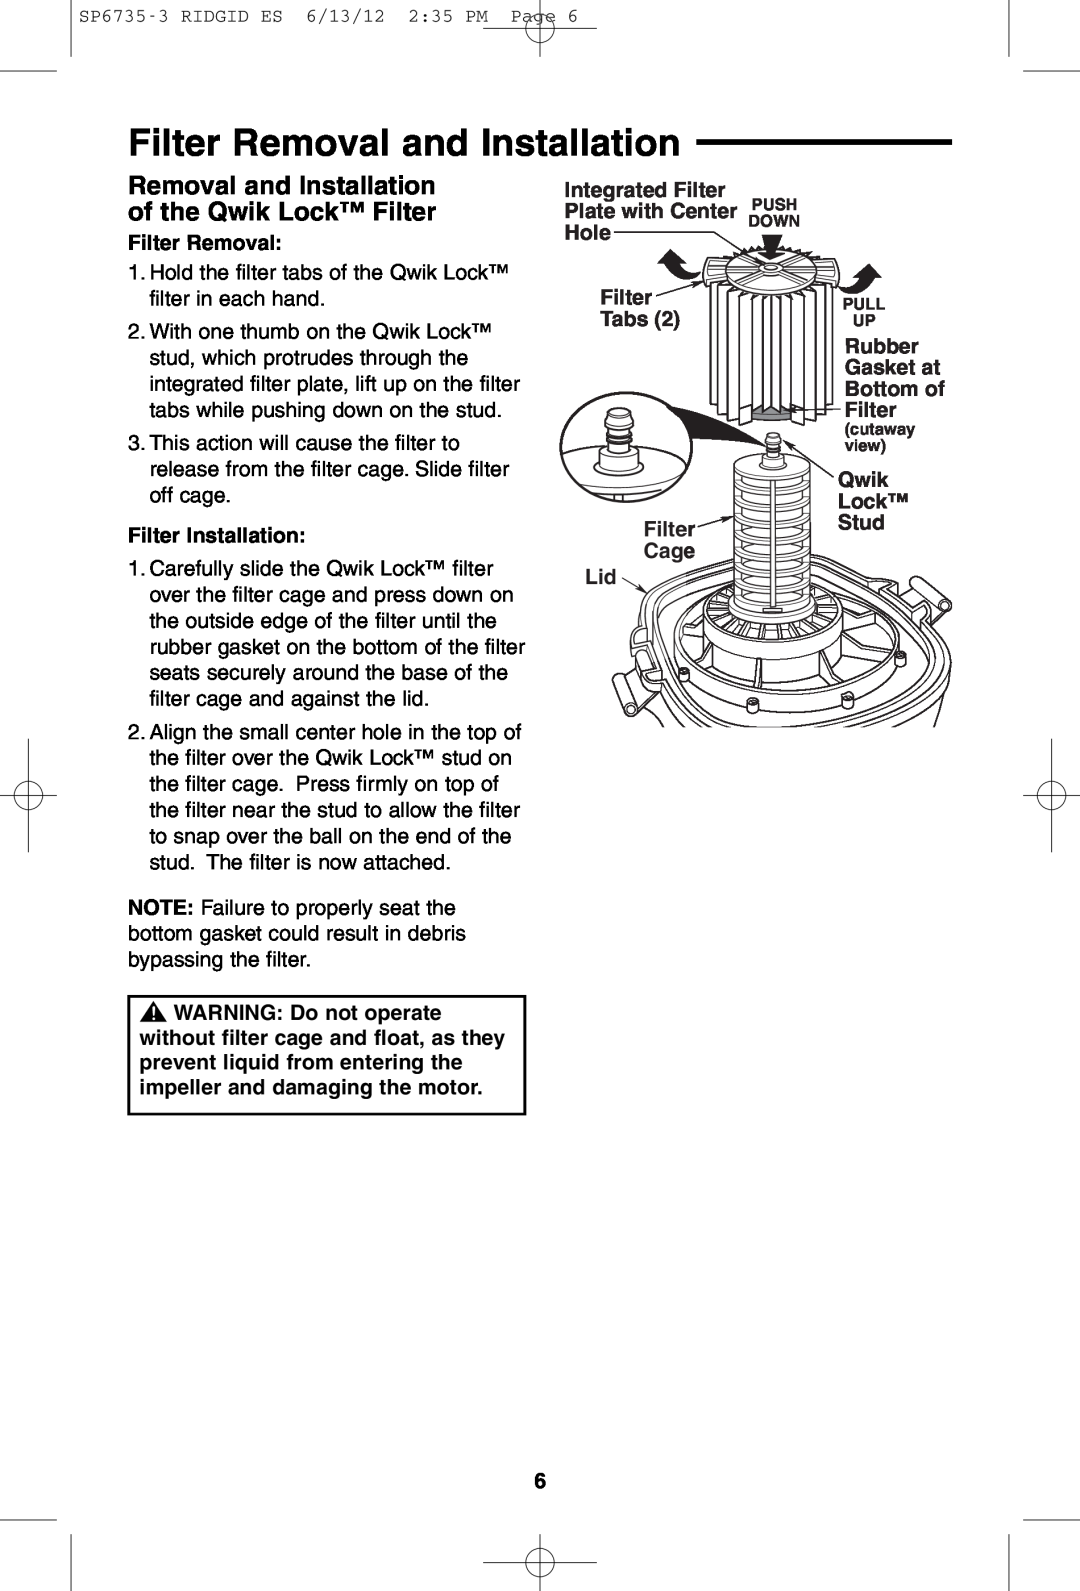 RIDGID WD14500 owner manual Filter Removal and Installation, Removal and Installation of the Qwik Lock Filter 